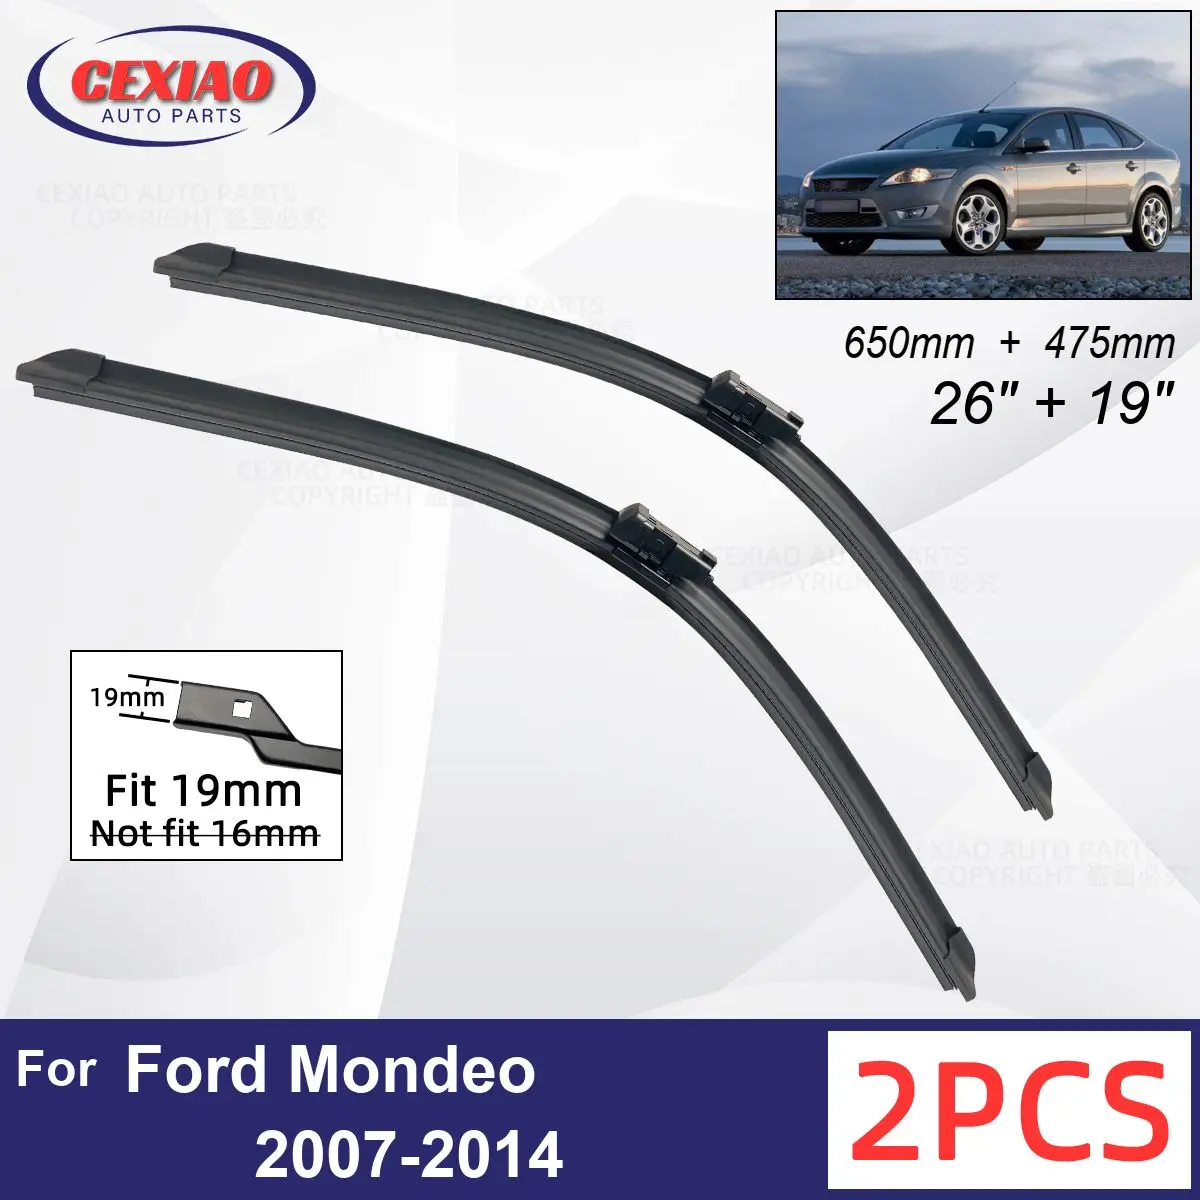 

Car Wiper For Ford Mondeo 2007-2014 Front Wiper Blades Soft Rubber Windscreen Wipers Auto Windshield 26" 19" 650mm 475mm